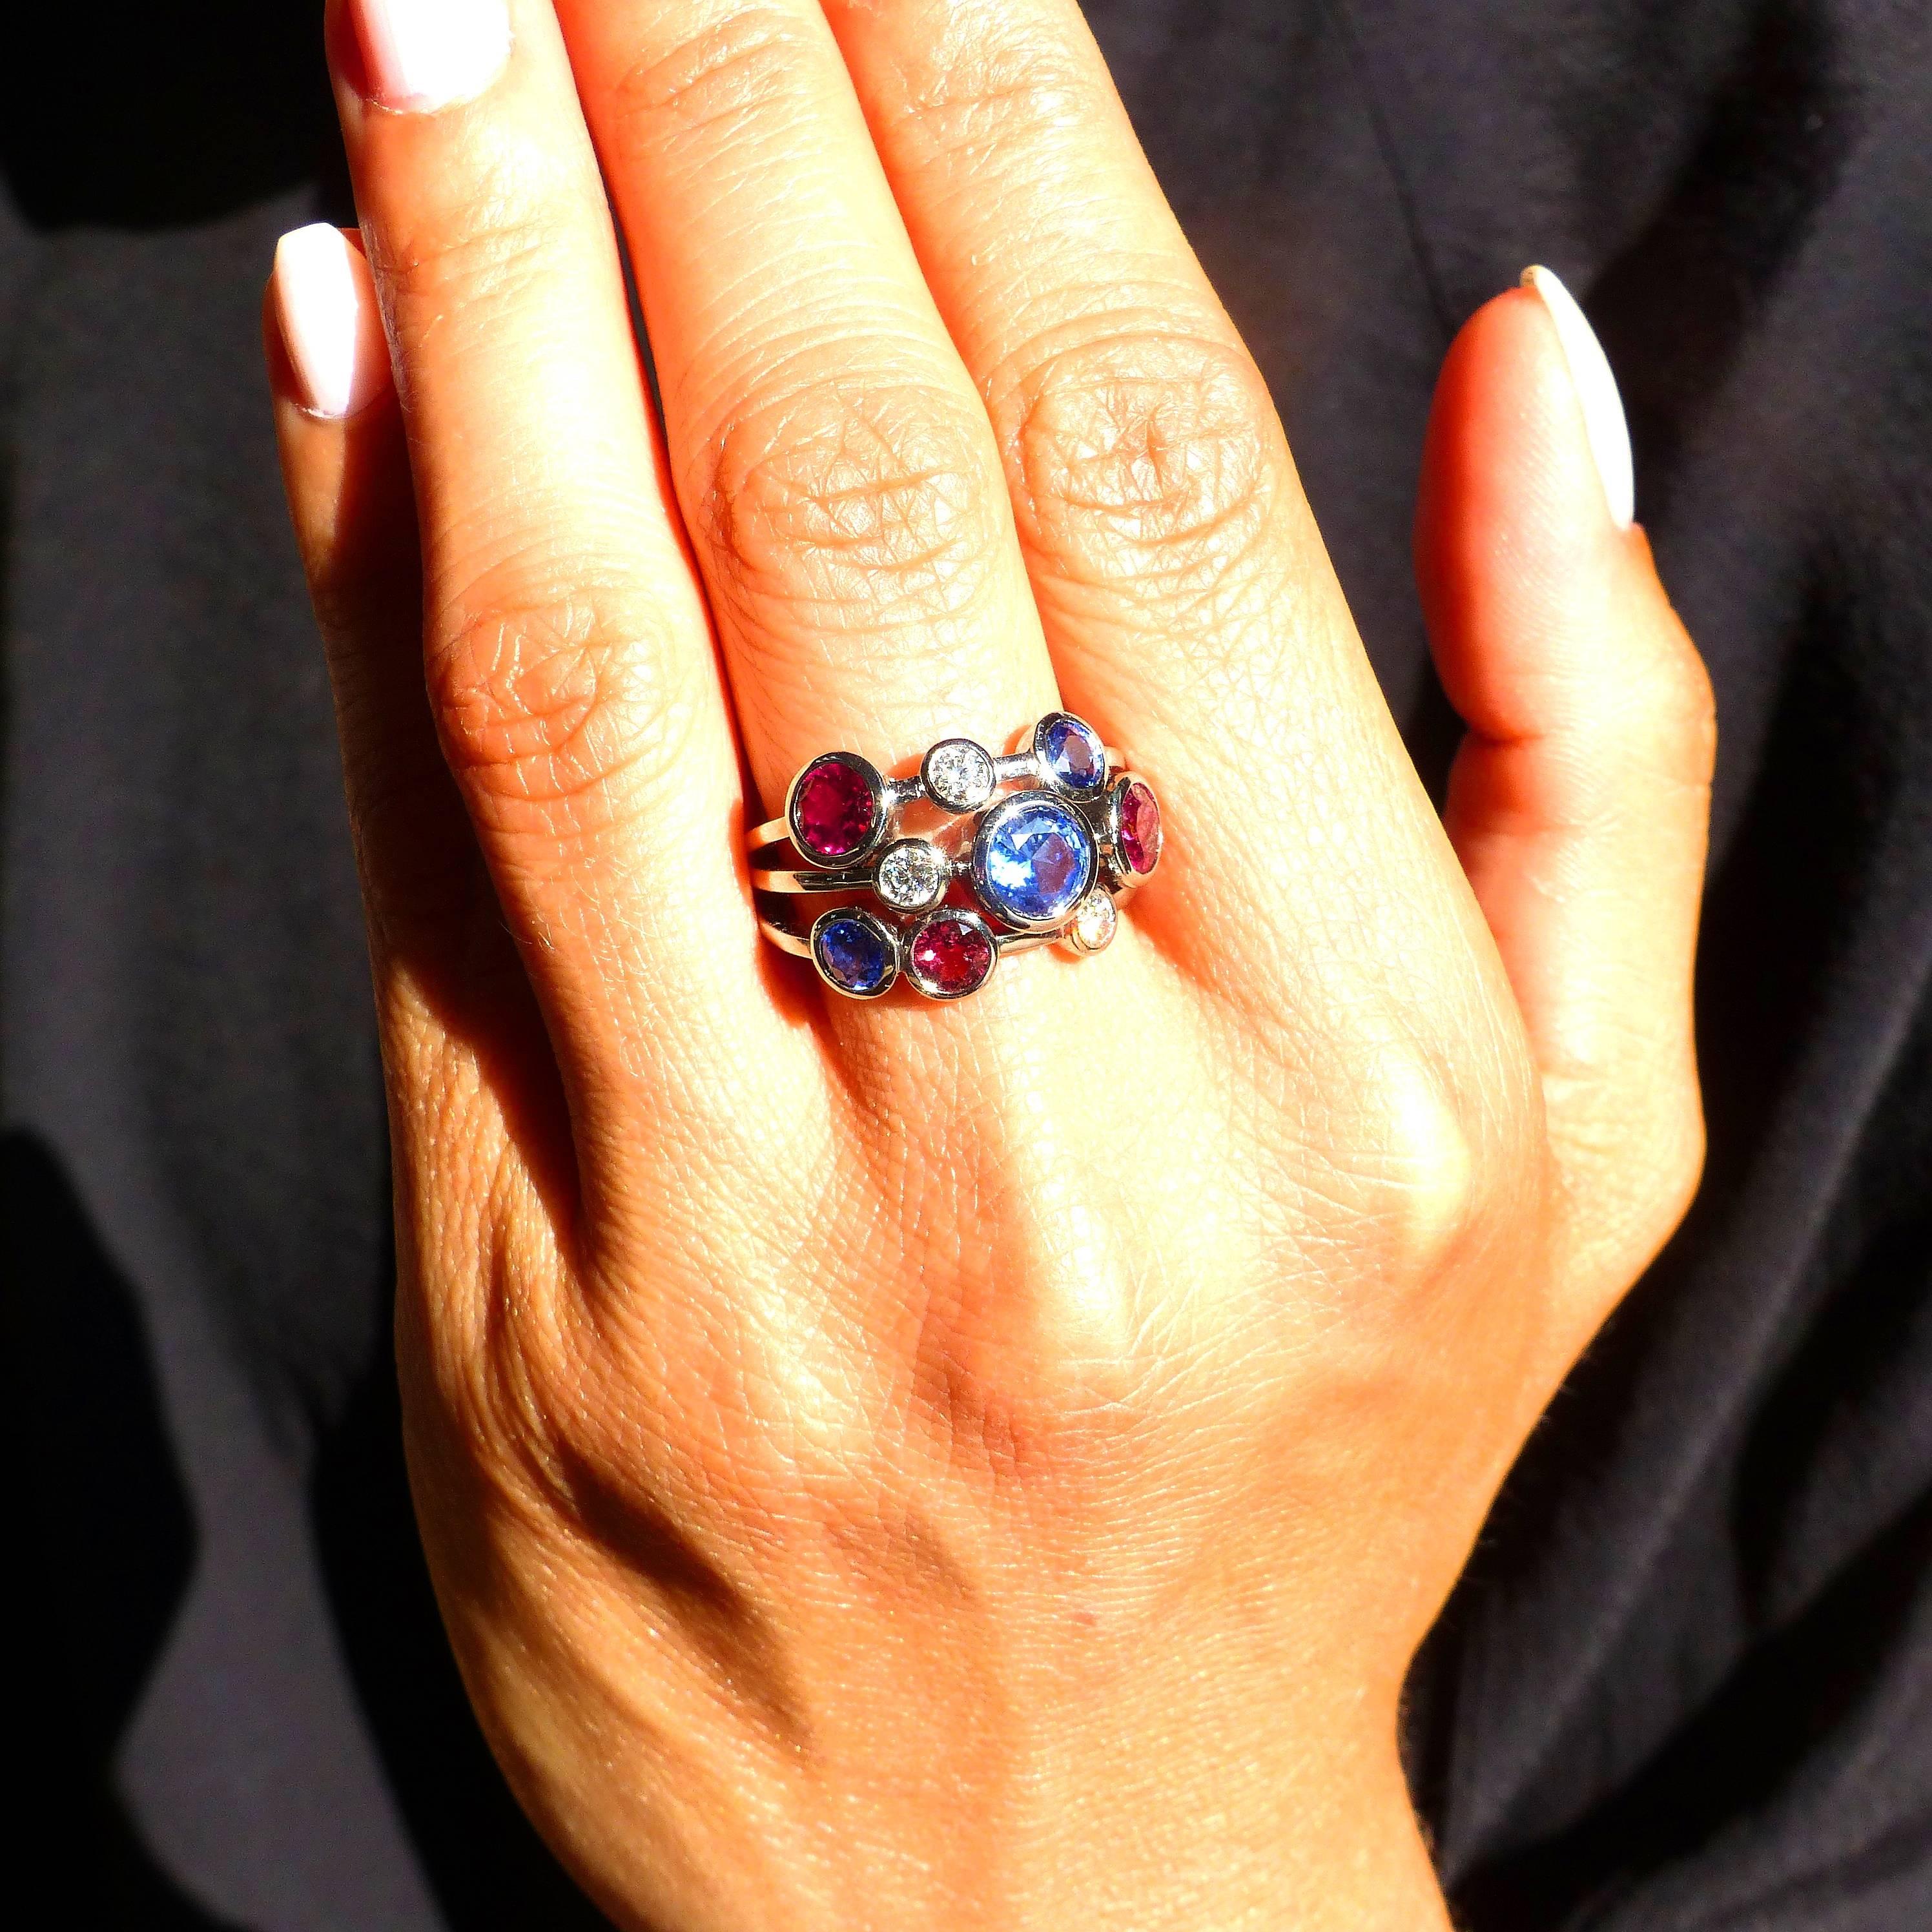 Round Cut Ring in White Gold with Sapphires and Rubelites and Diamonds. For Sale